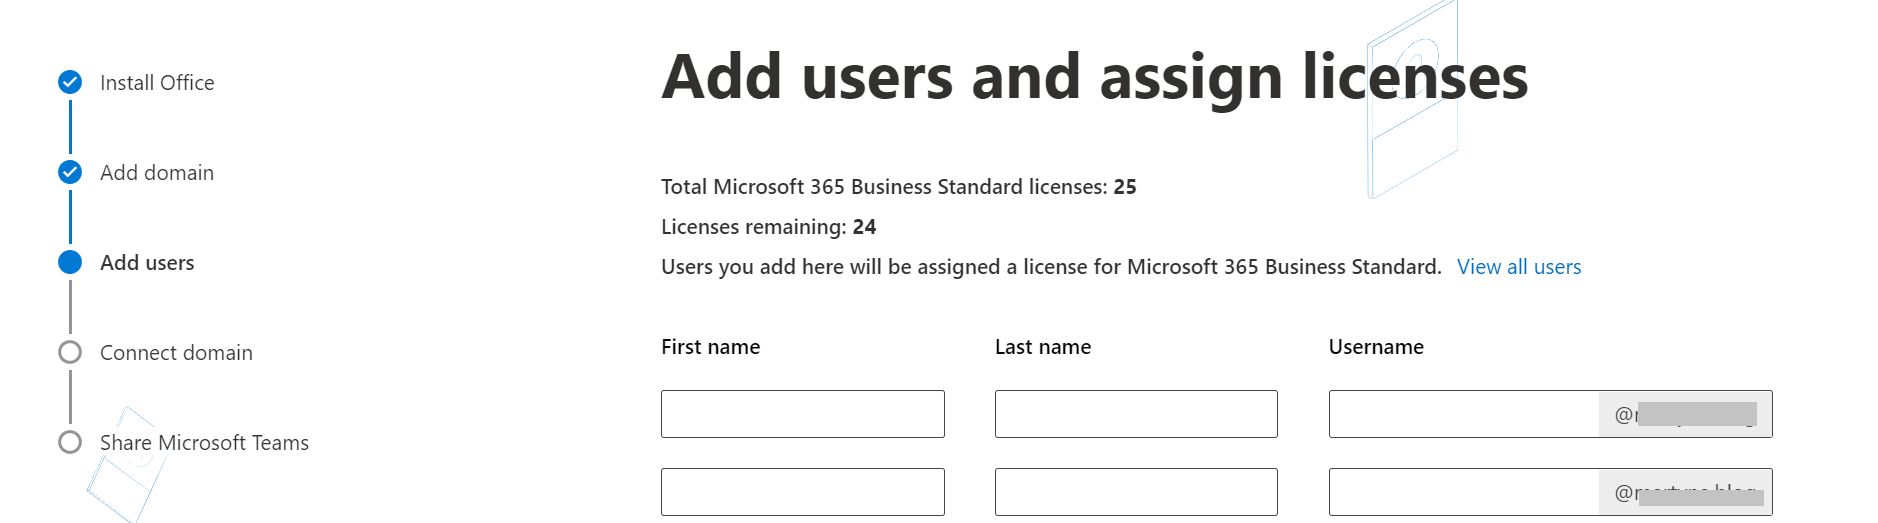 Adding users to a custom branded email address in Office 365.